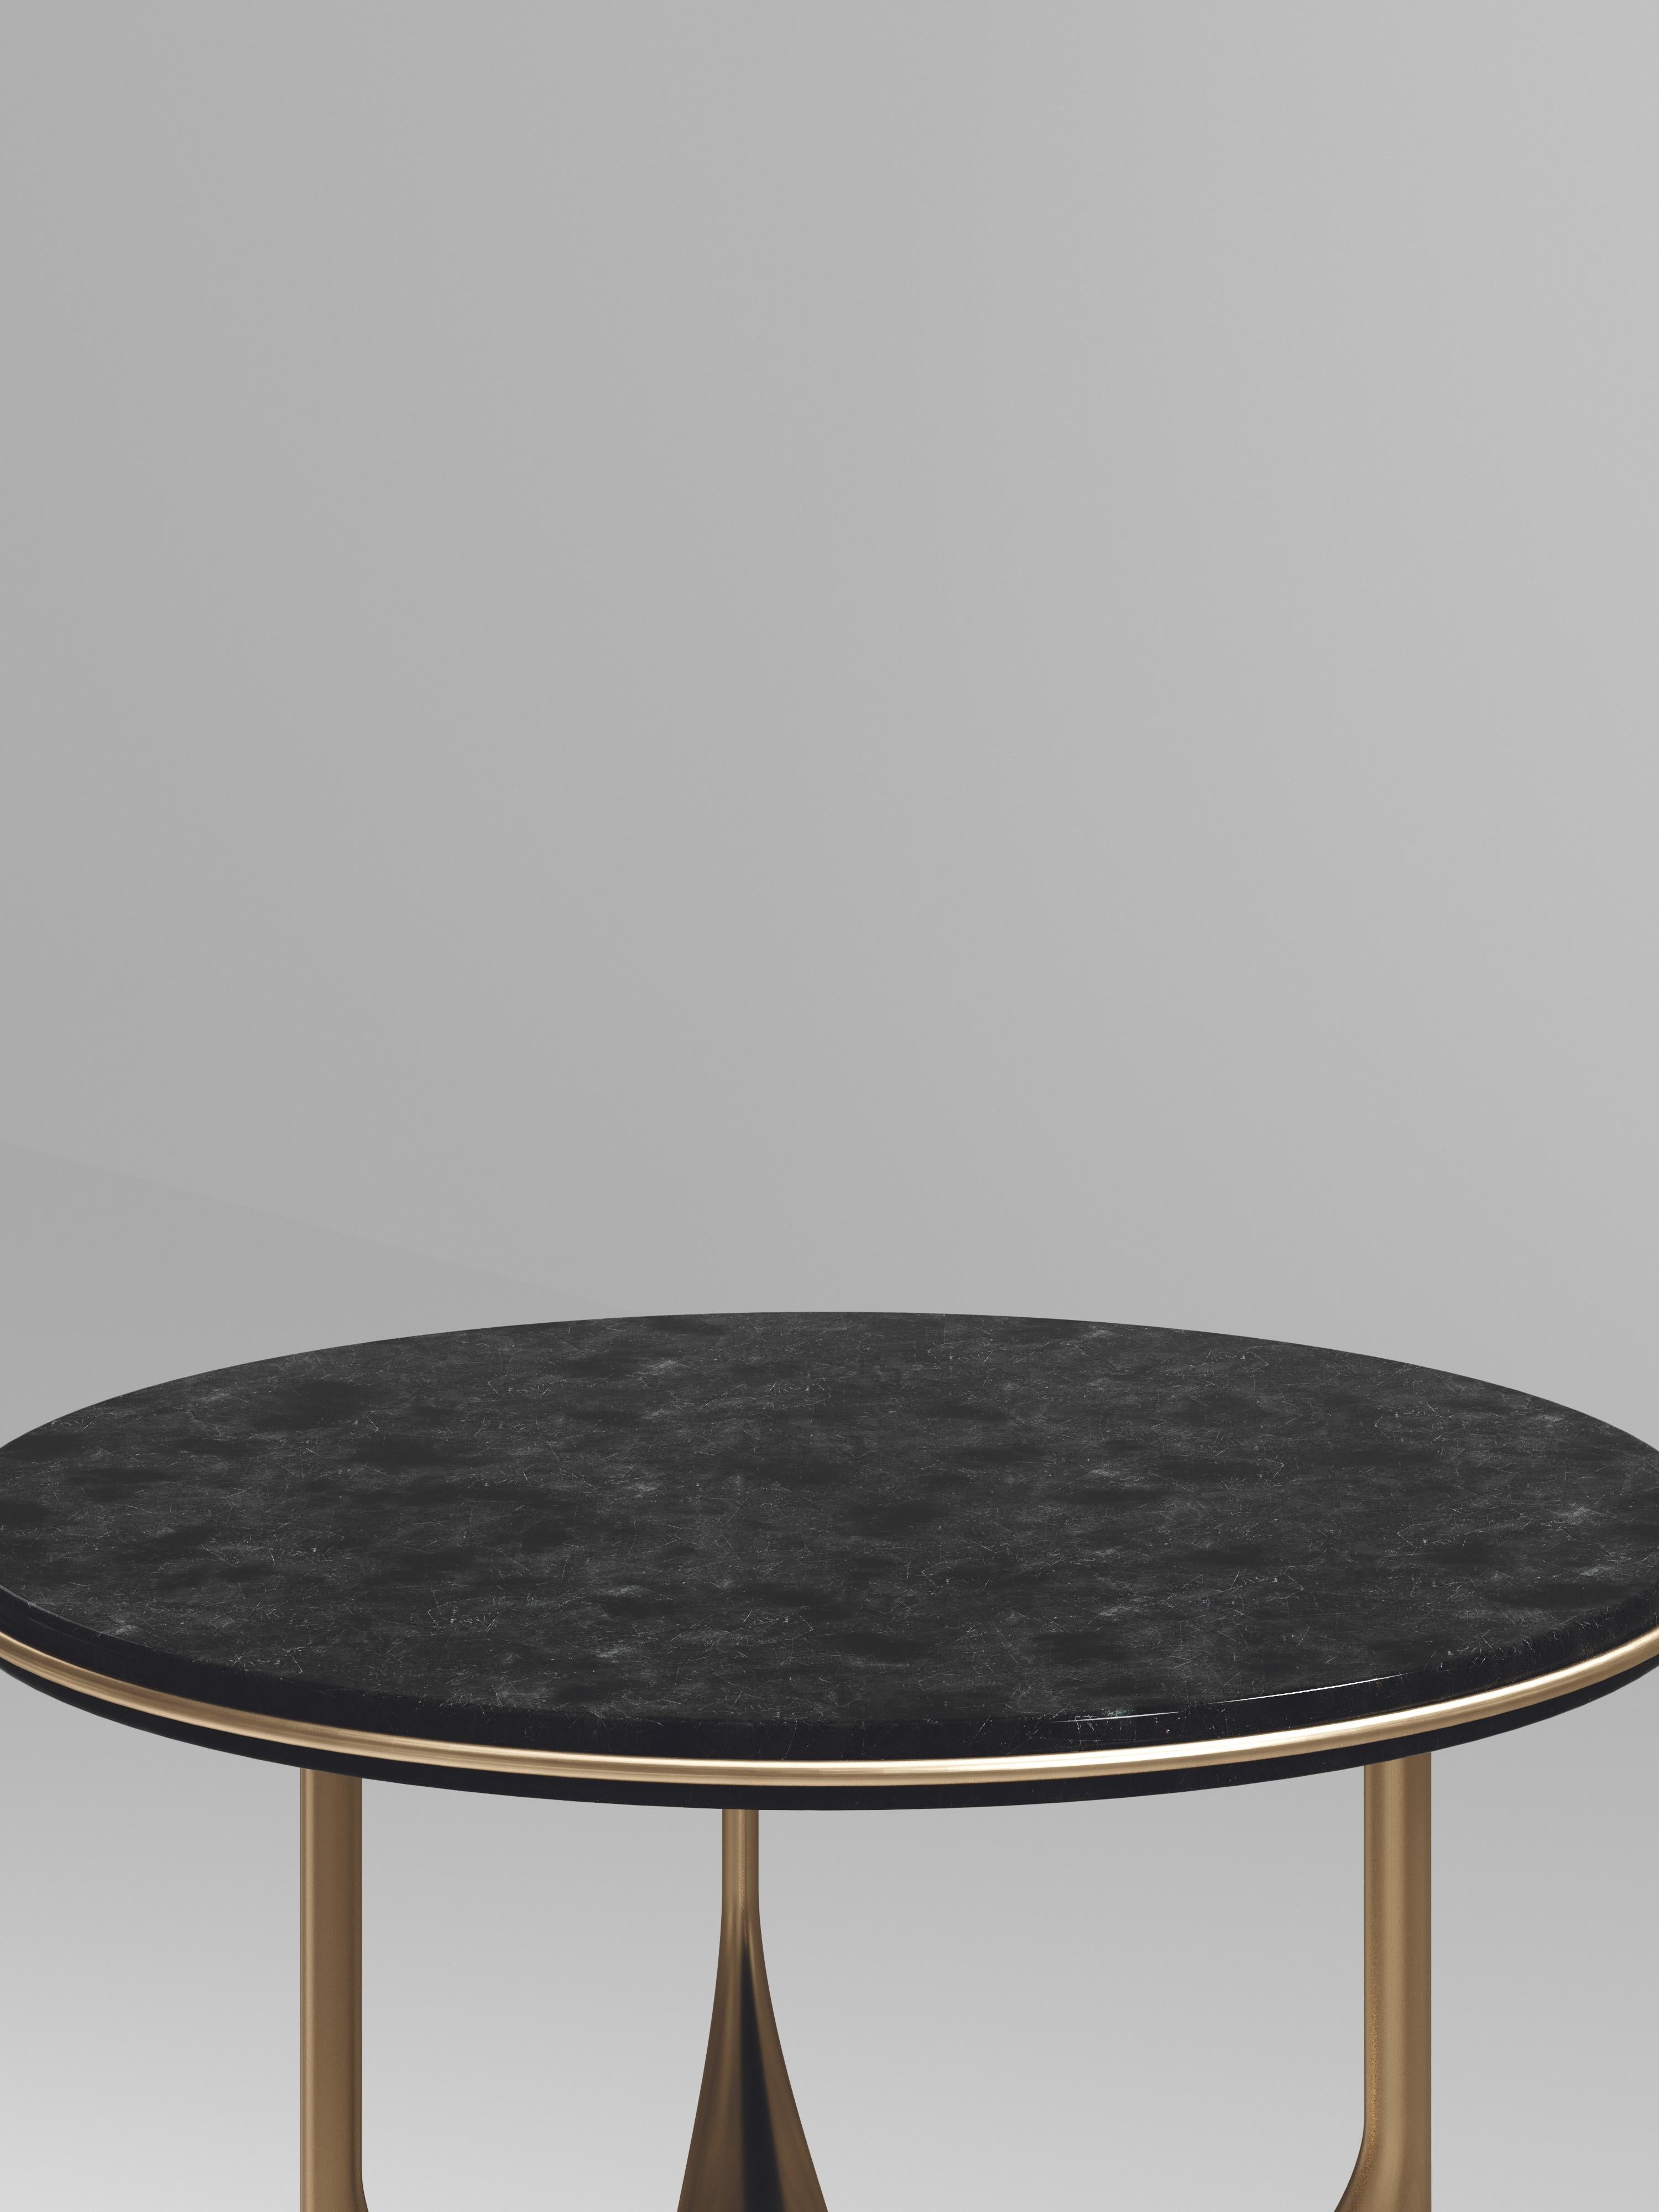 The Plumeria side table II by Kifu Paris is a dramatic and sculptural piece. The black shell inlaid top sits on a sculptural bronze-patina brass base that is conceptually inspired by bird feathers floating on top of a lake. The border of the top is